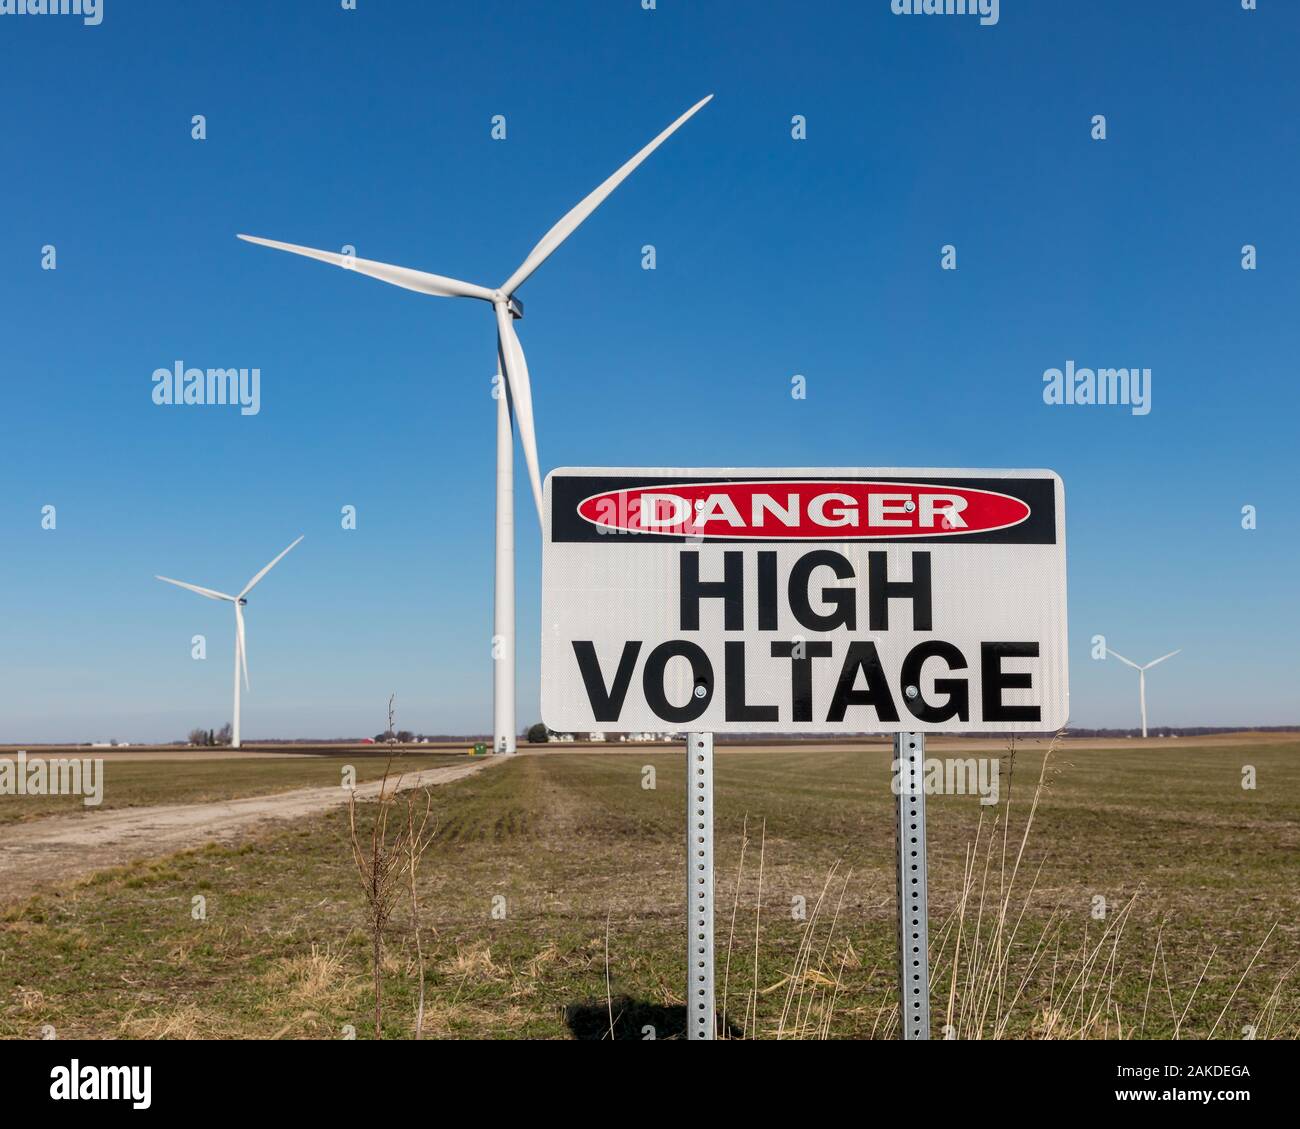 High voltage danger warning sign with wind turbine, windmill, in background. Concept of clean, green energy and danger of electricity Stock Photo